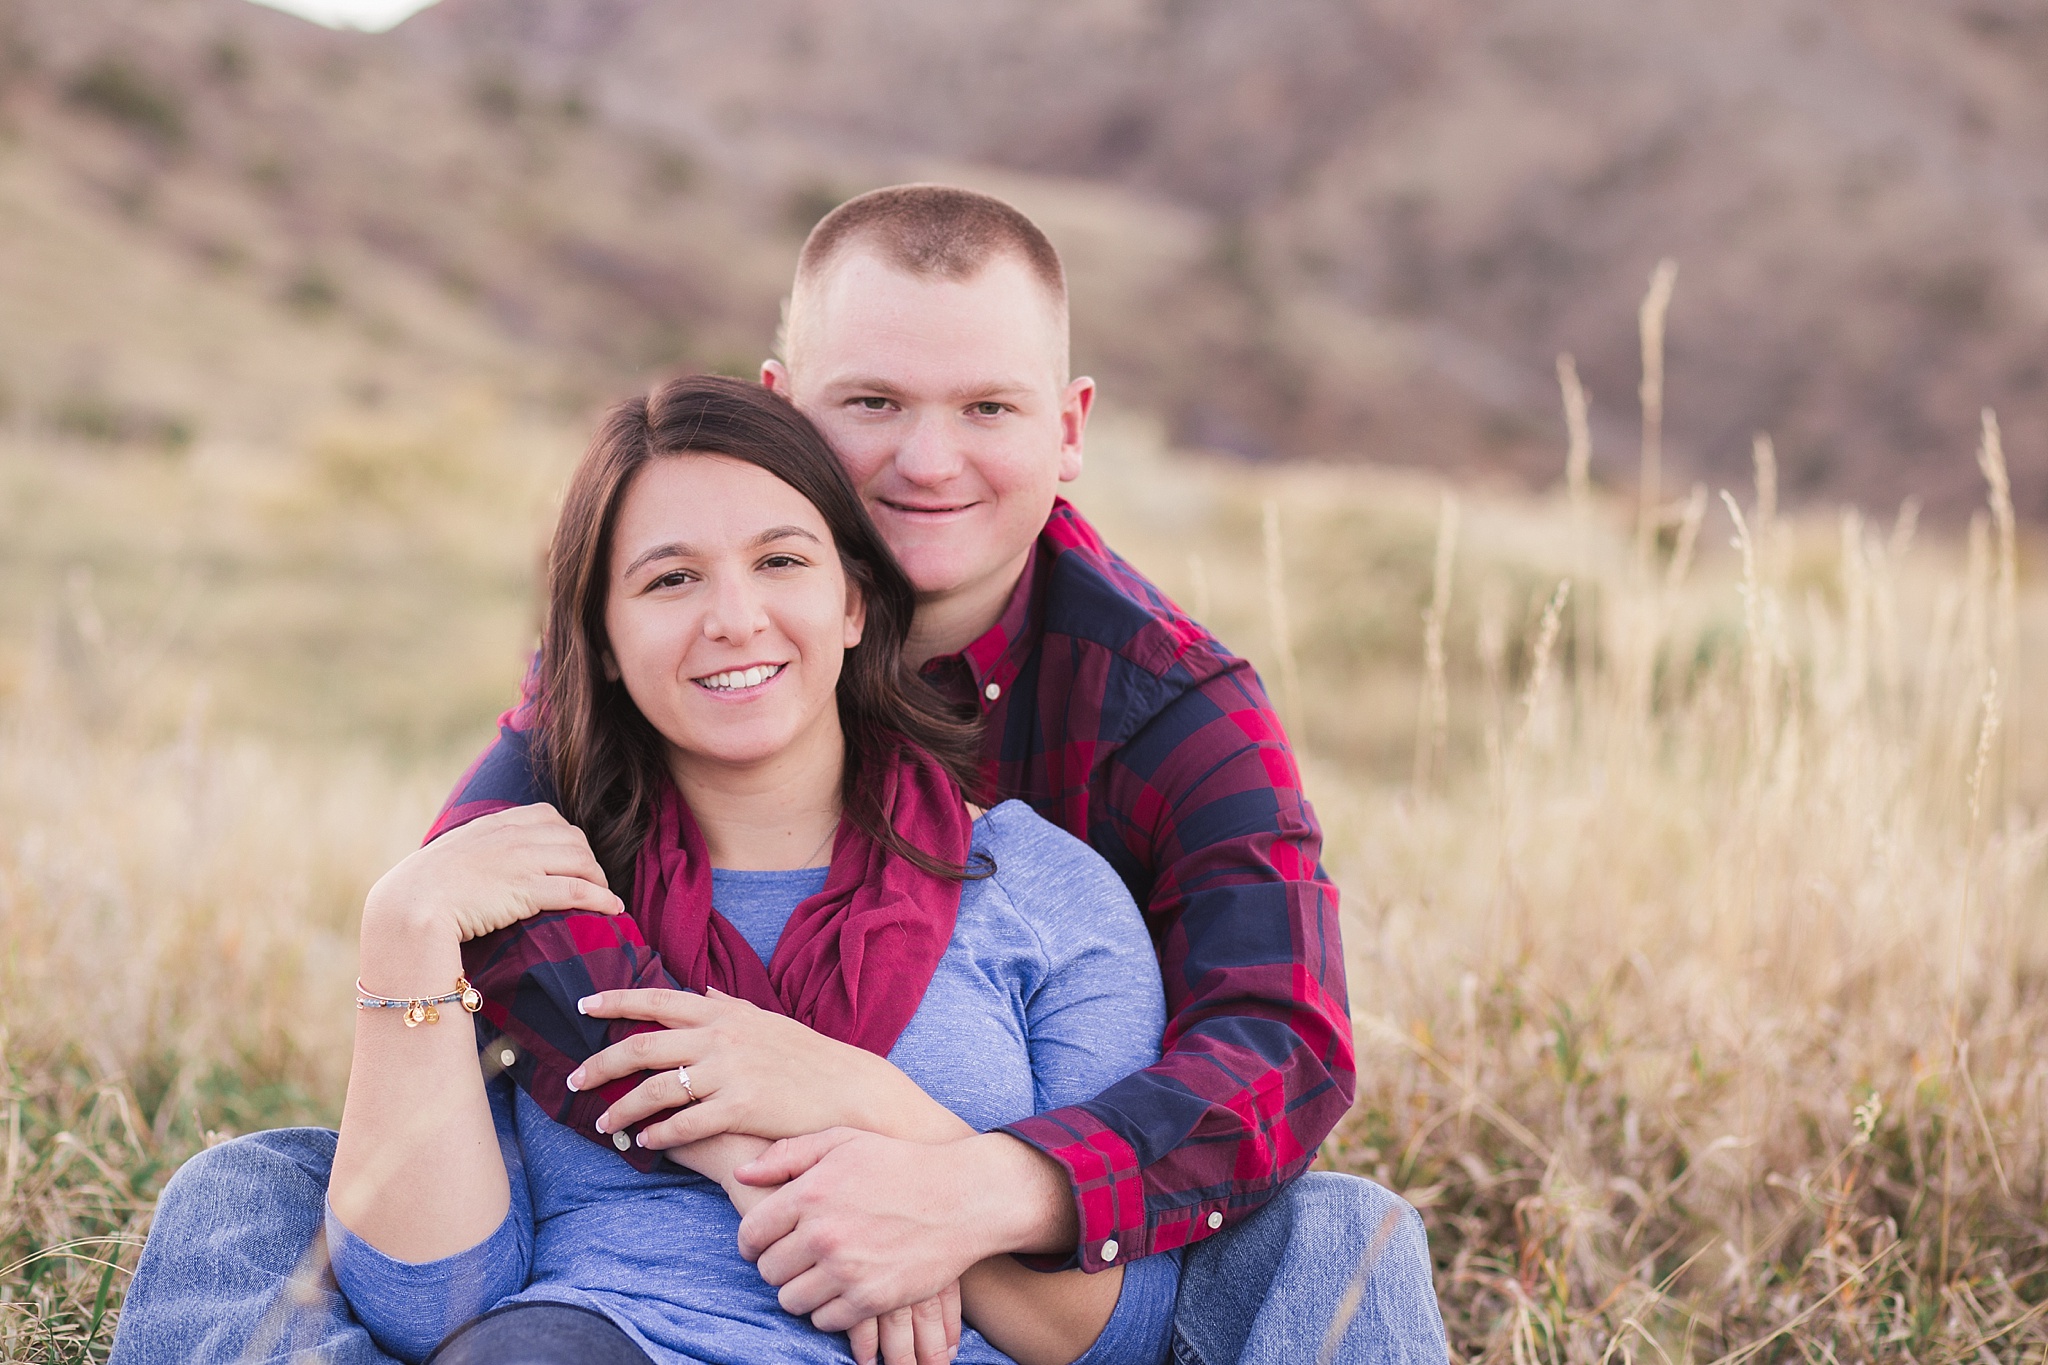 Tania & Chris' Mt. Falcon Engagement Session by Jennifer Garza Photography, Mt. Falcon Engagement Session, Mt. Falcon Engagement Photos, Morrison Engagement Photos, Red Rocks Engagement Photos, Colorado Engagement Photos, Colorado Engagement, Rocky Mountain Bride